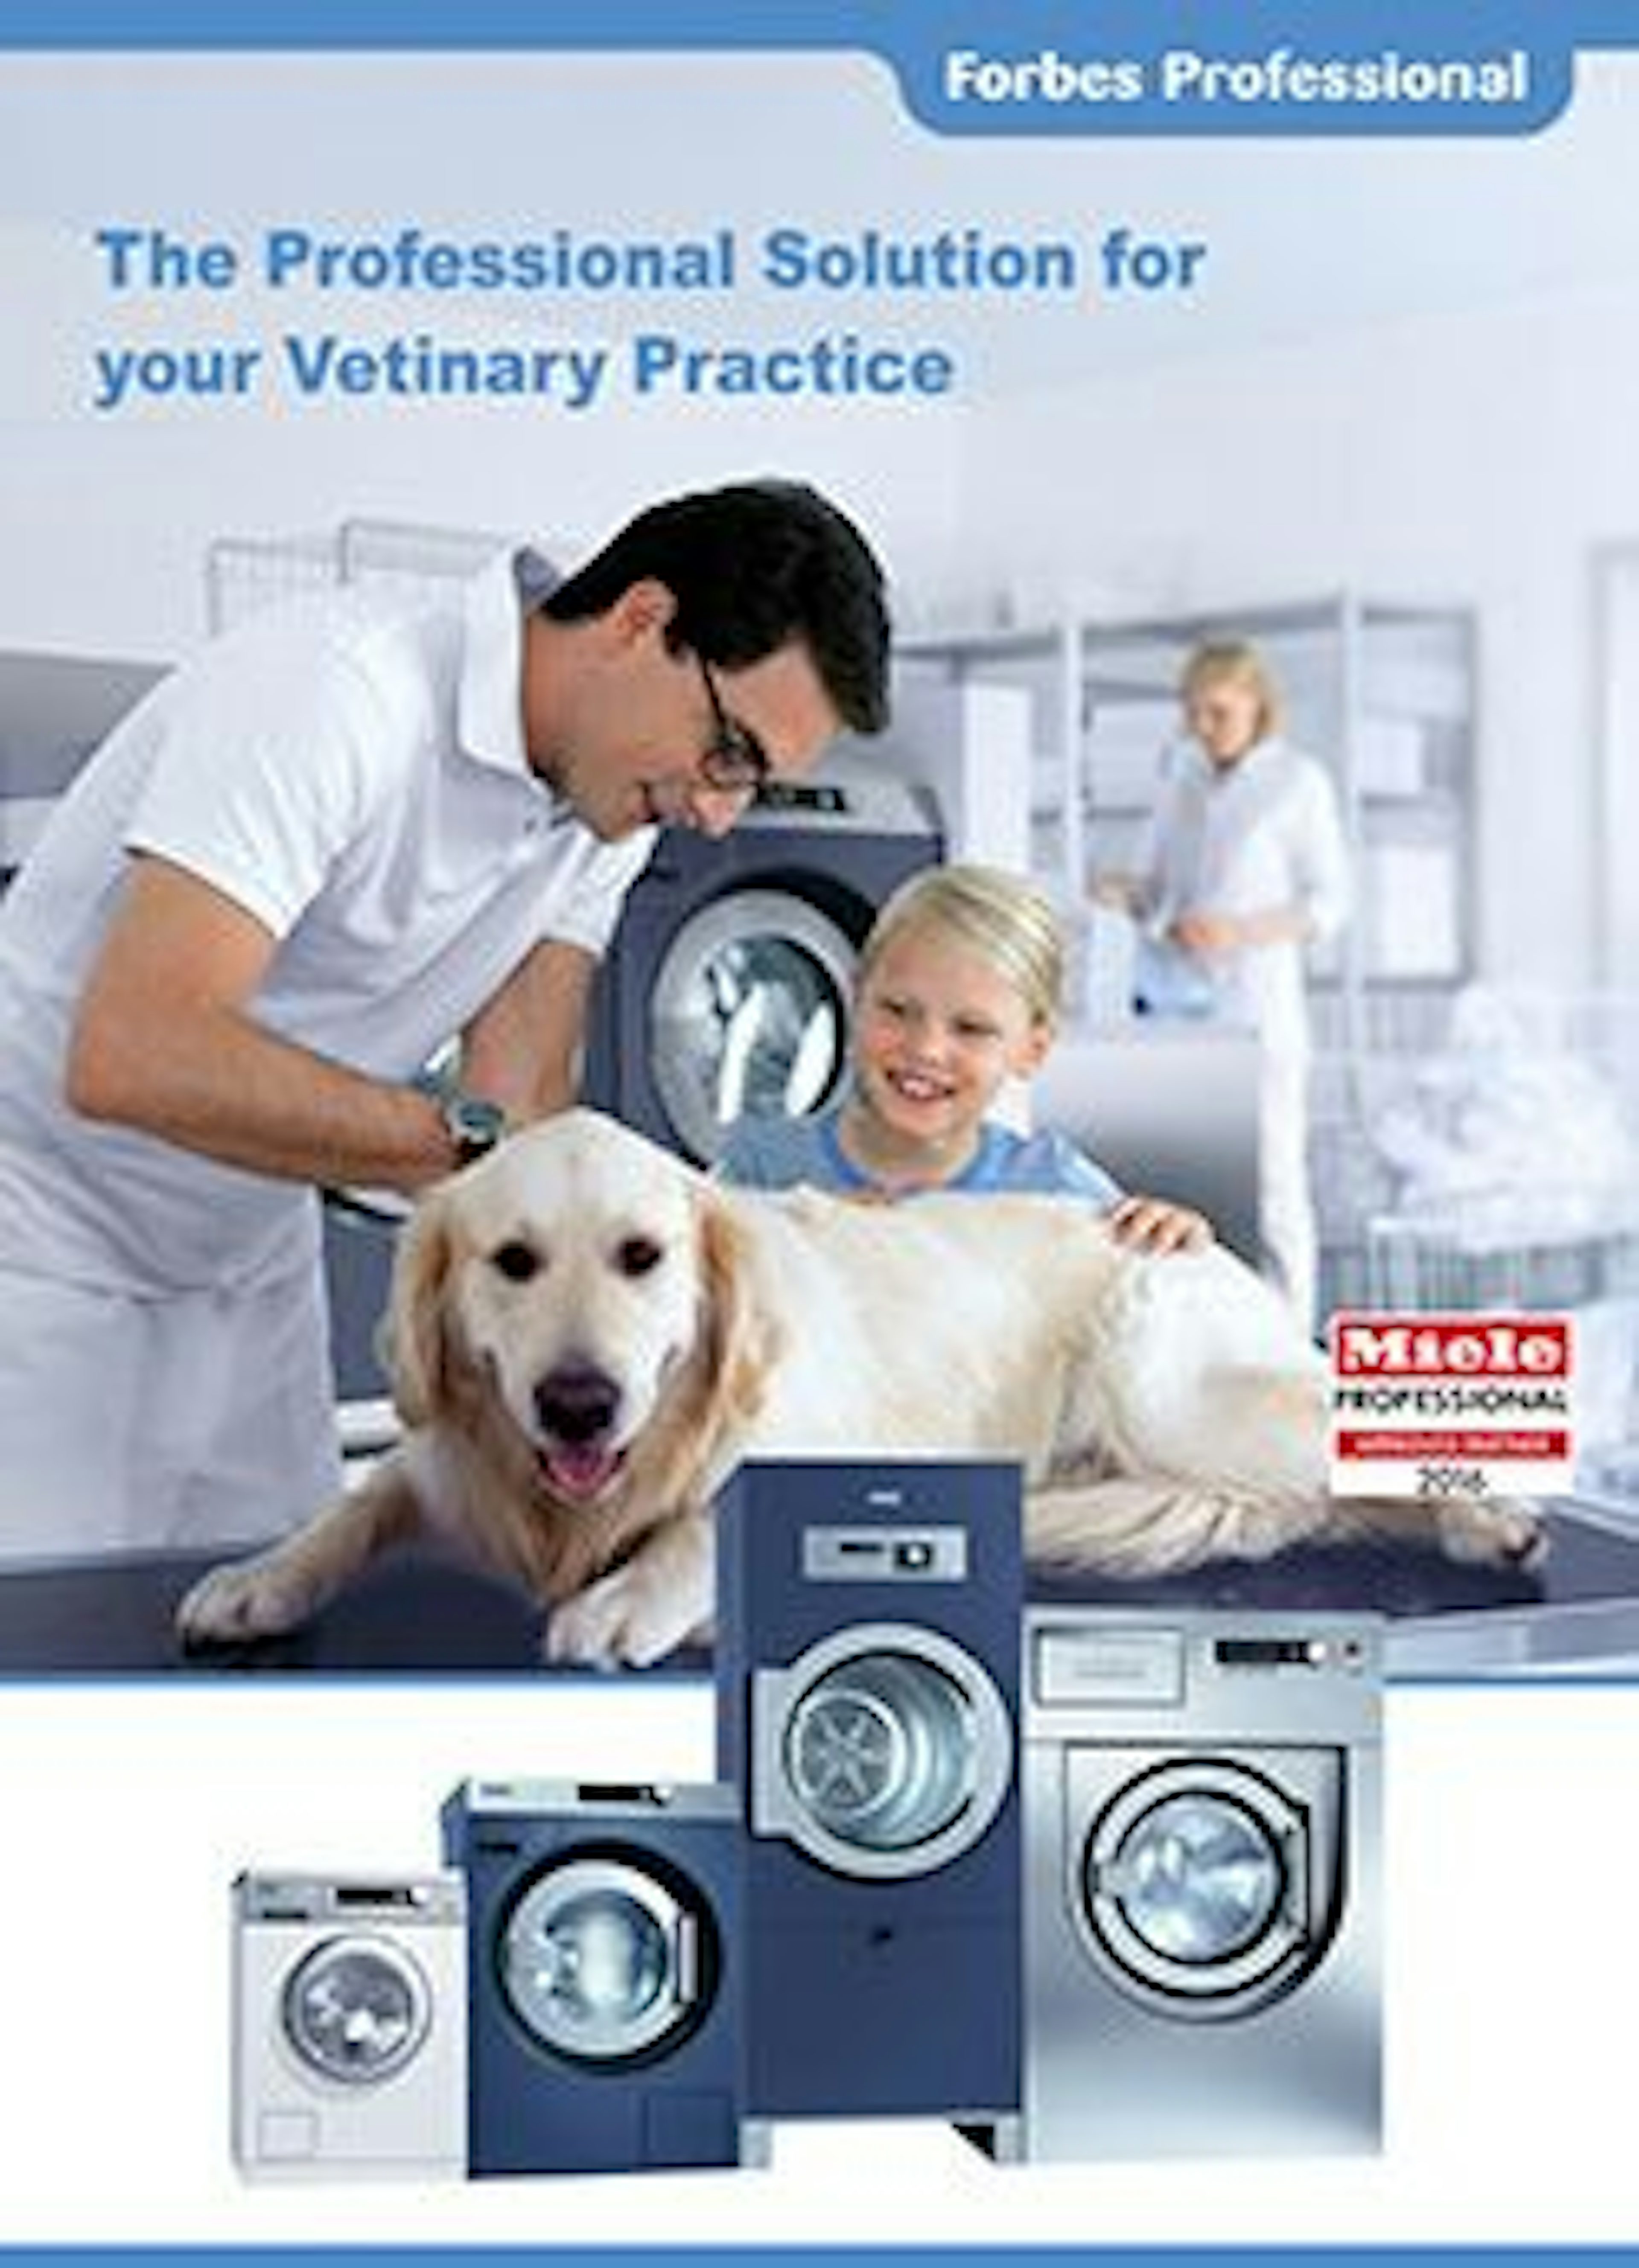 Forbes Professional logo top right hand corner, then a dog on vets table, with vet examining dog and child to the right stroking dog. There are Miele washers and dryers at the bottom of the photo. 